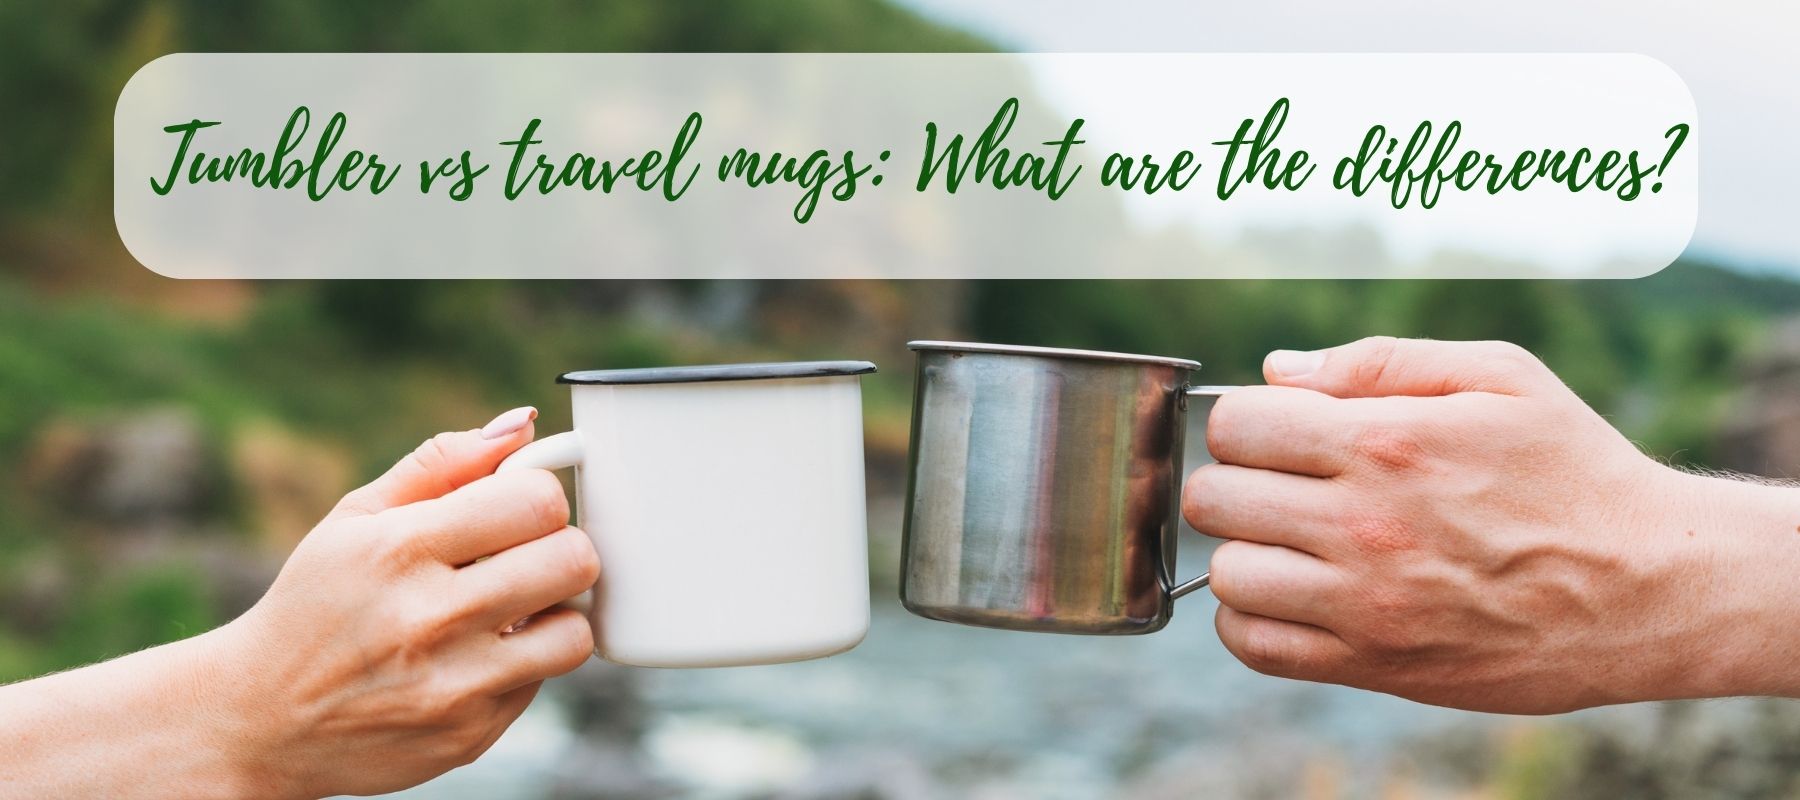 Tumbler vs travel mugs: What are the differences? - Unifury